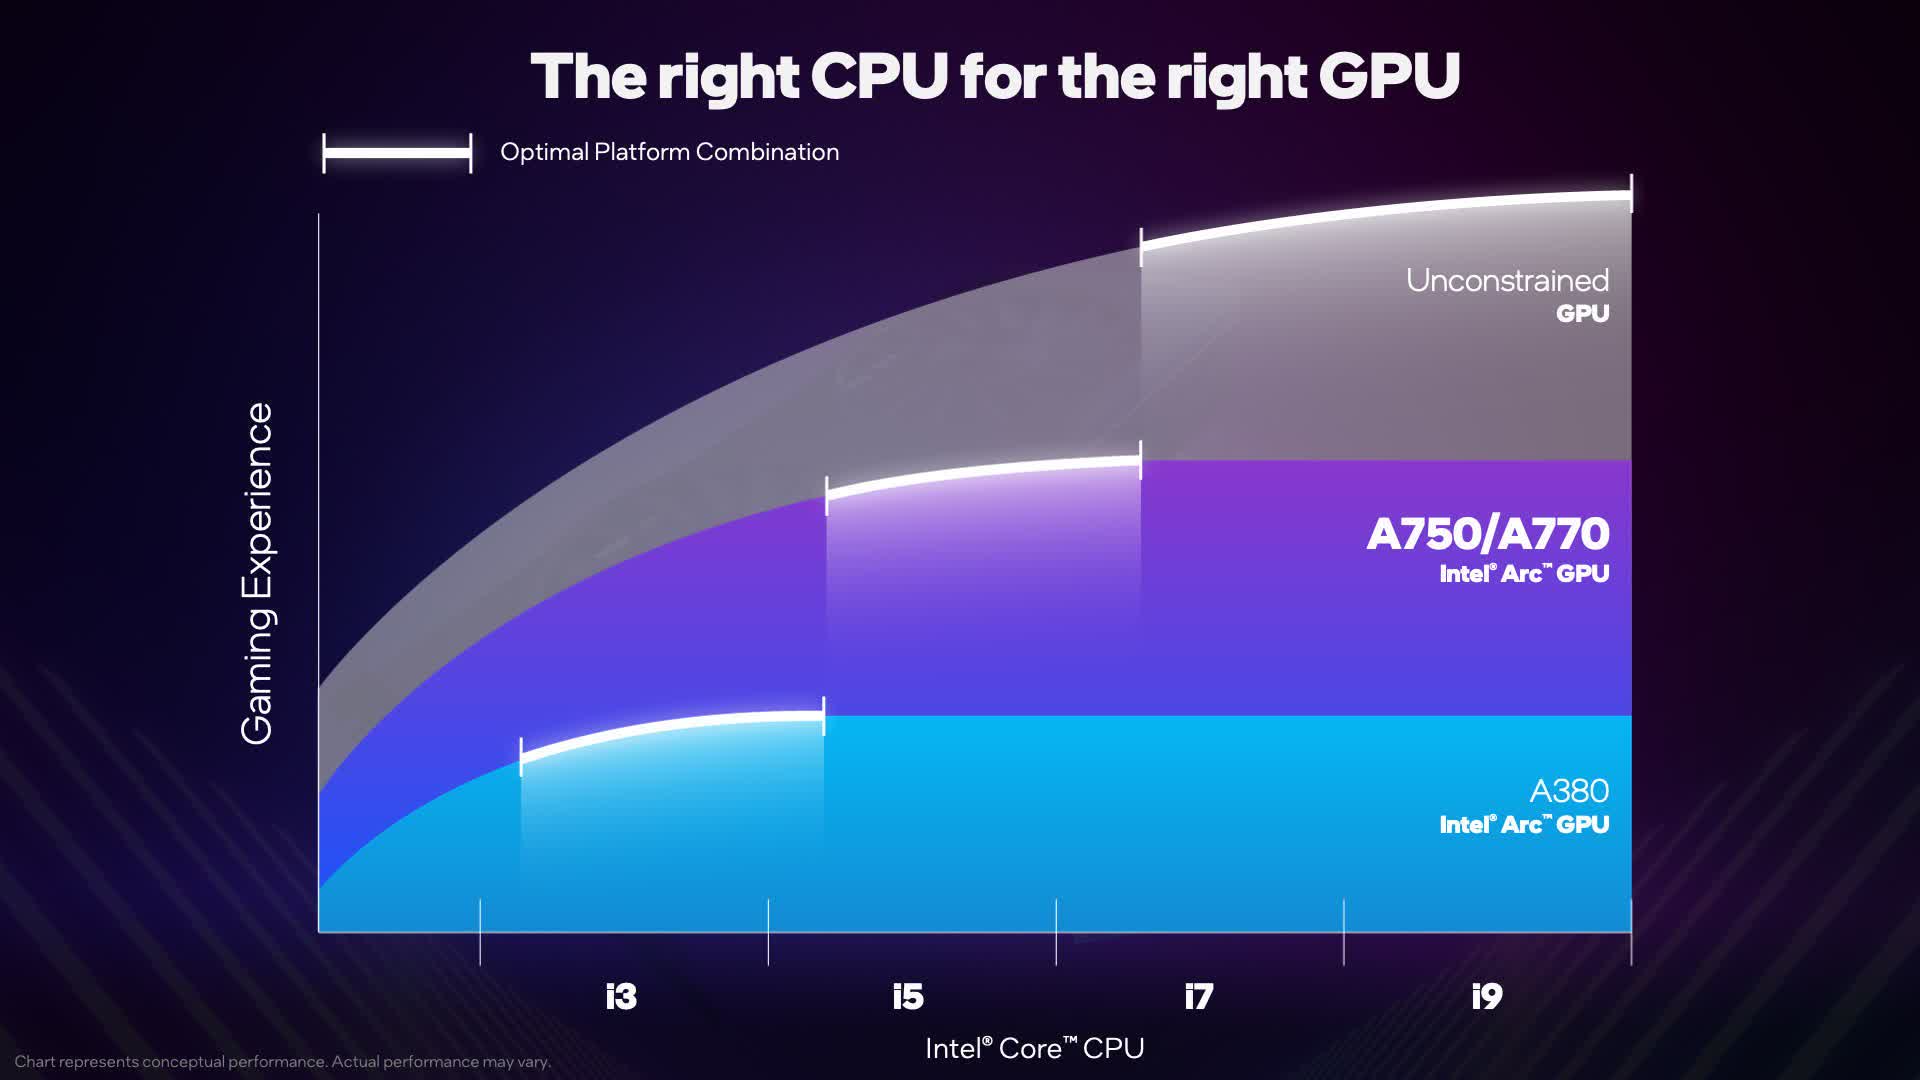 Intel pushes Arc GPUs with construct ideas and “balanced” pre-builts